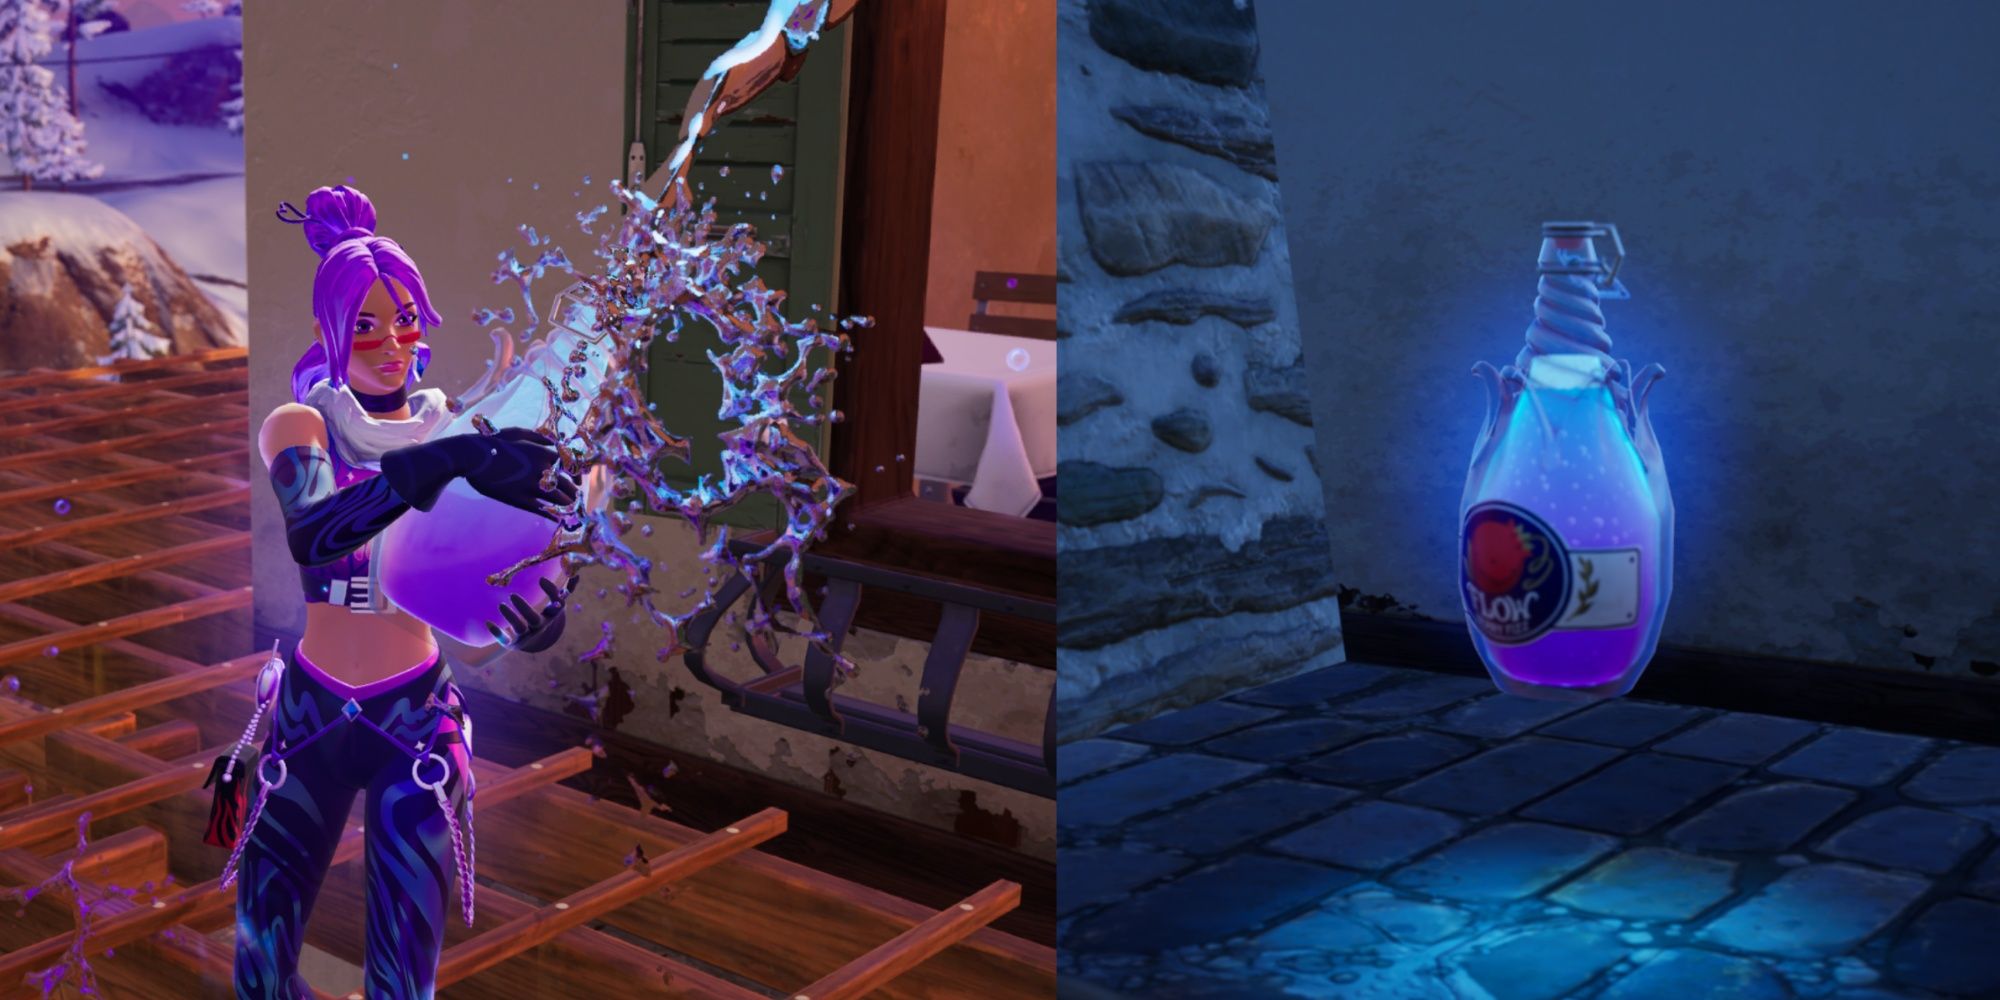 A split image of a player using the FlowBerry fizz item and the FlowBerry Fizz bottle on the floor in Fortnite.